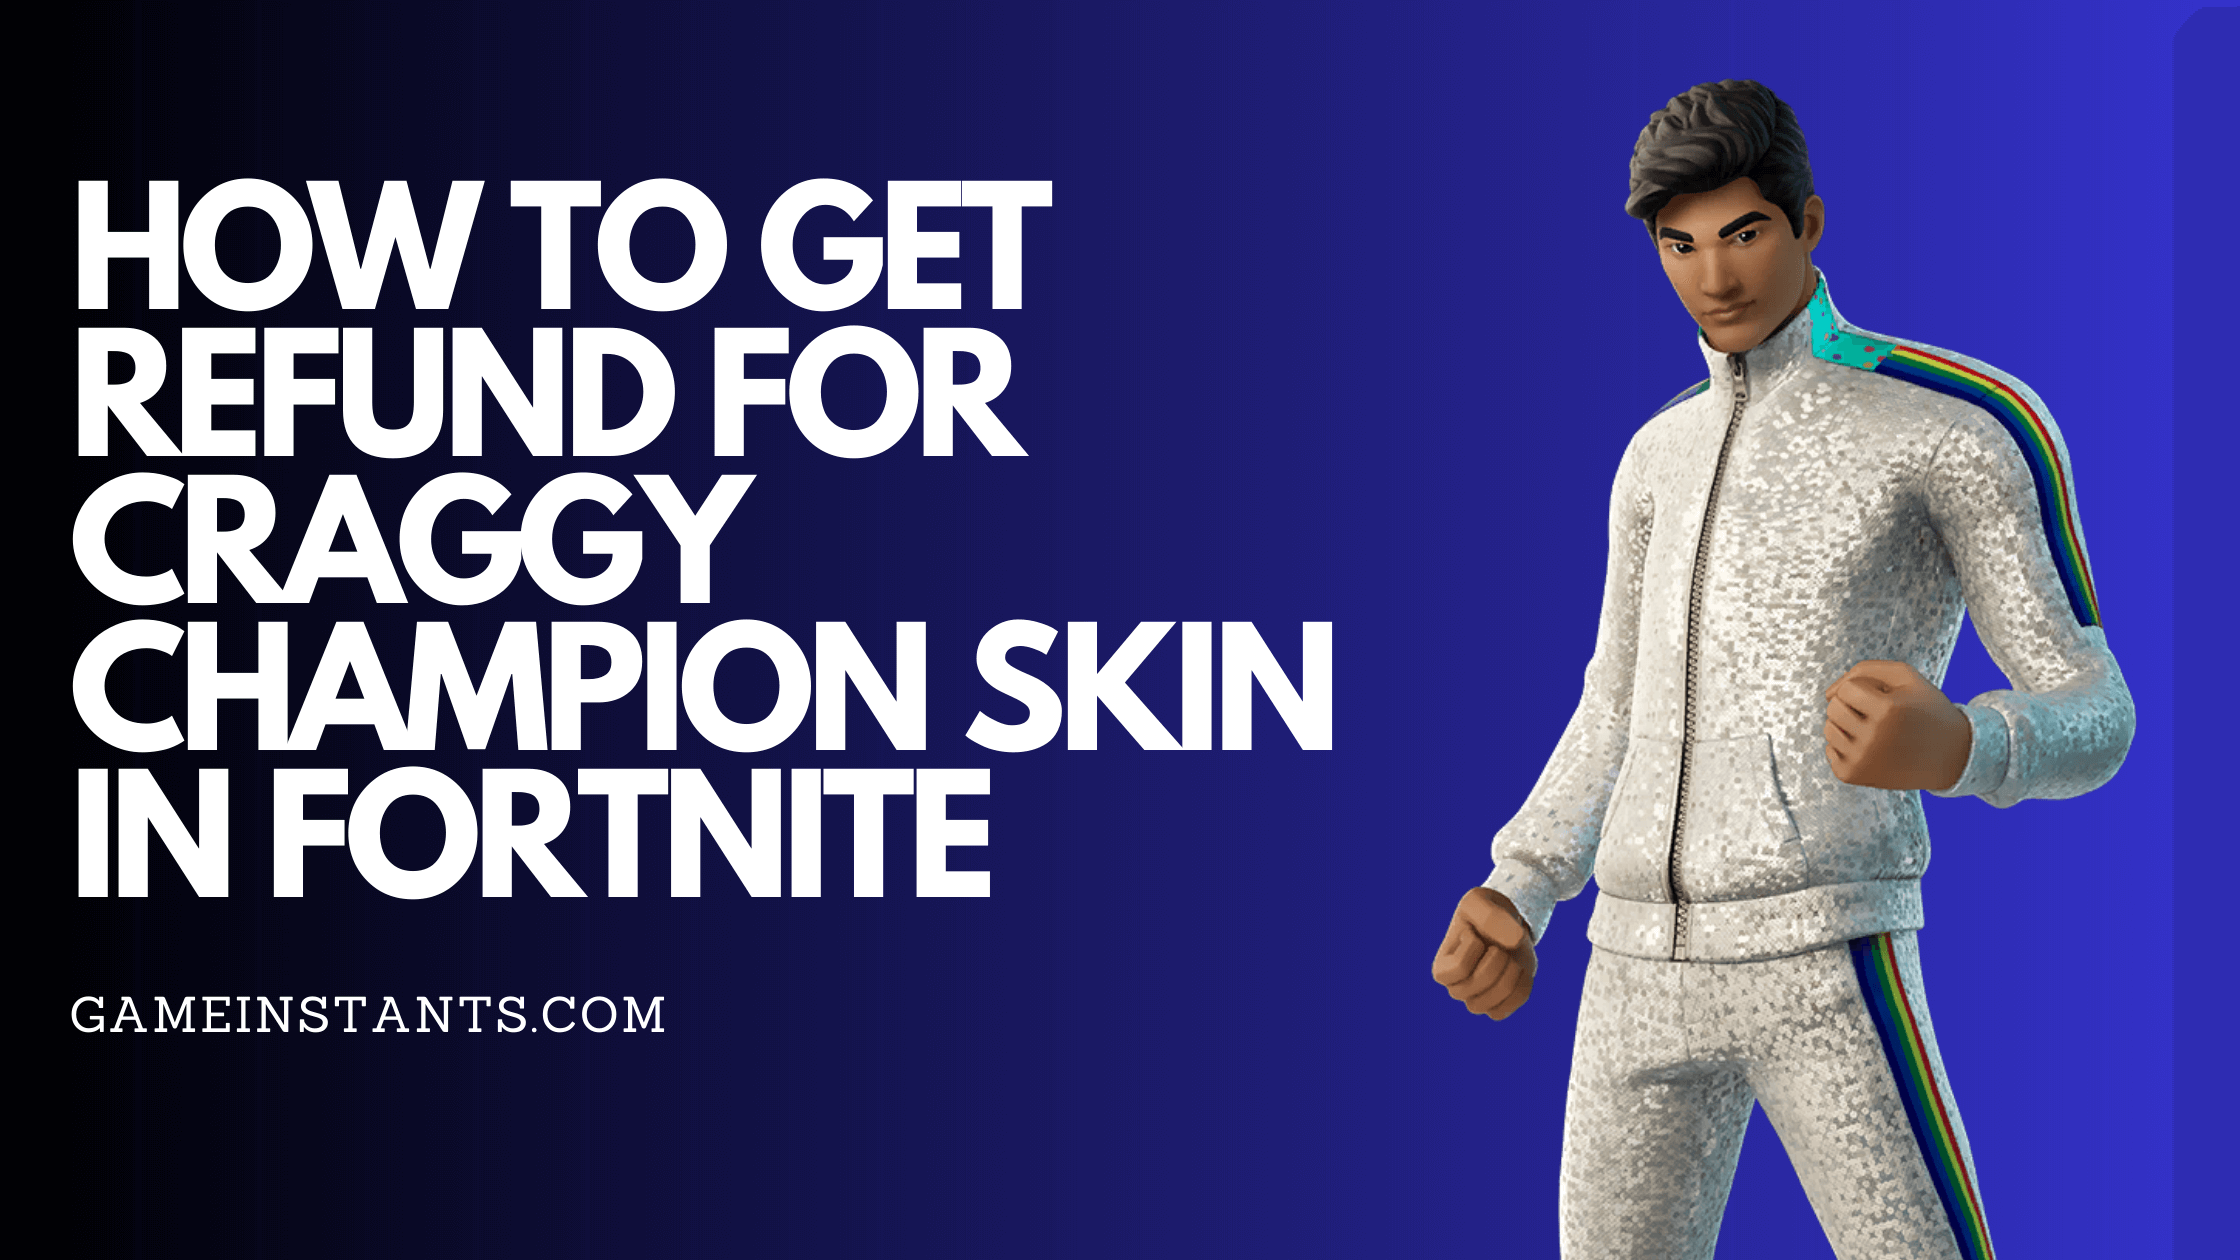 Refund For Craggy Champion Skin in Fortnite